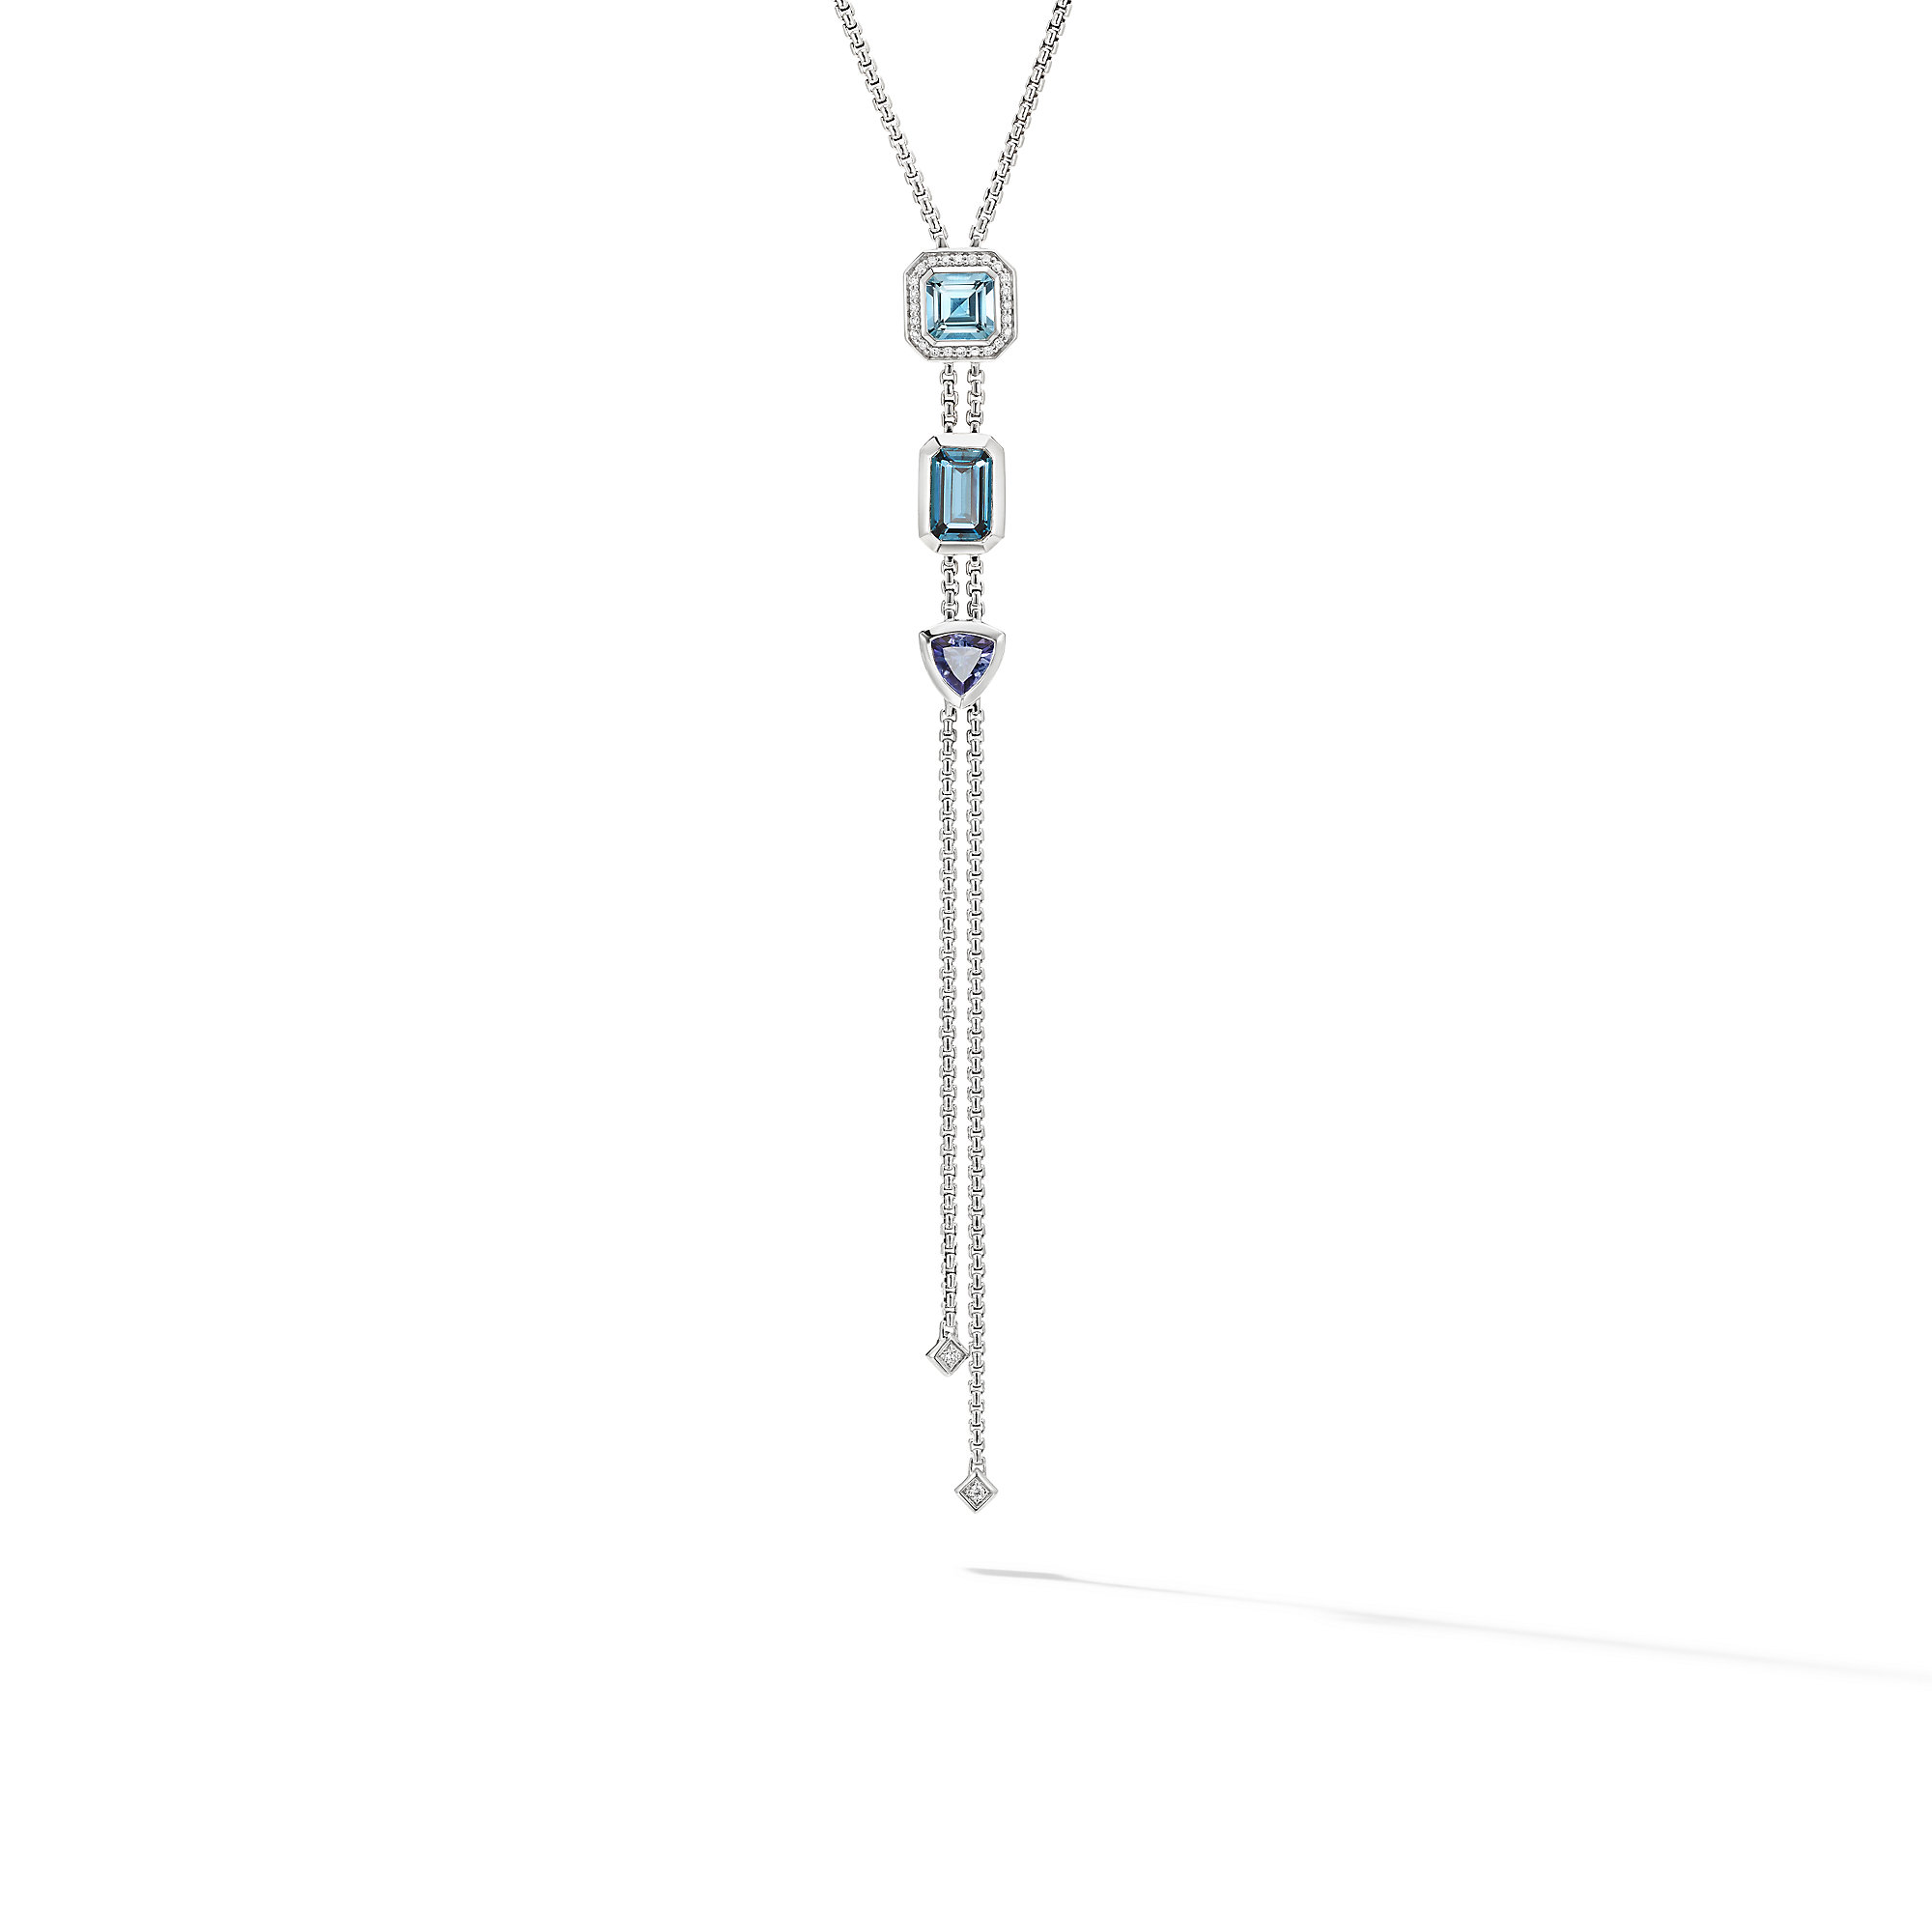 Novella Y Necklace with Blue Topaz and Pave Diamonds